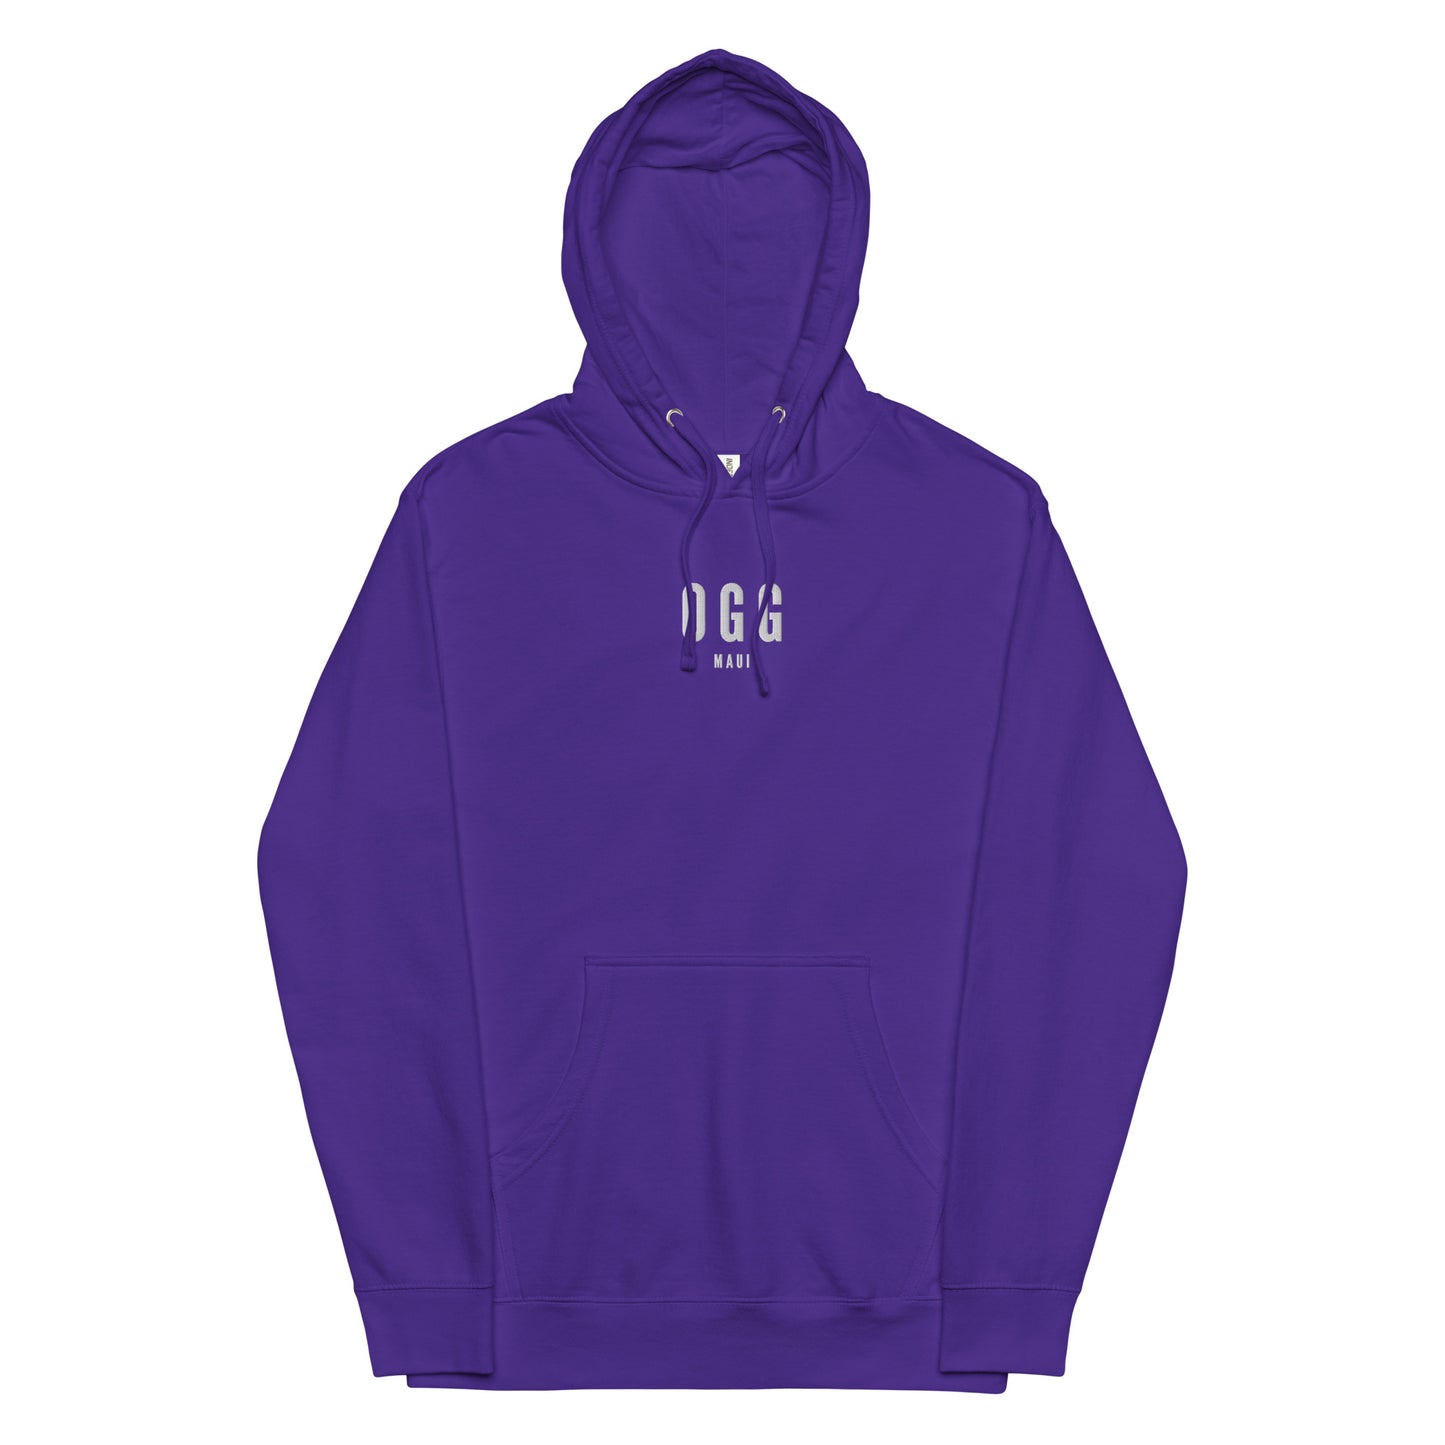 City Midweight Hoodie - White • OGG Maui • YHM Designs - Image 12